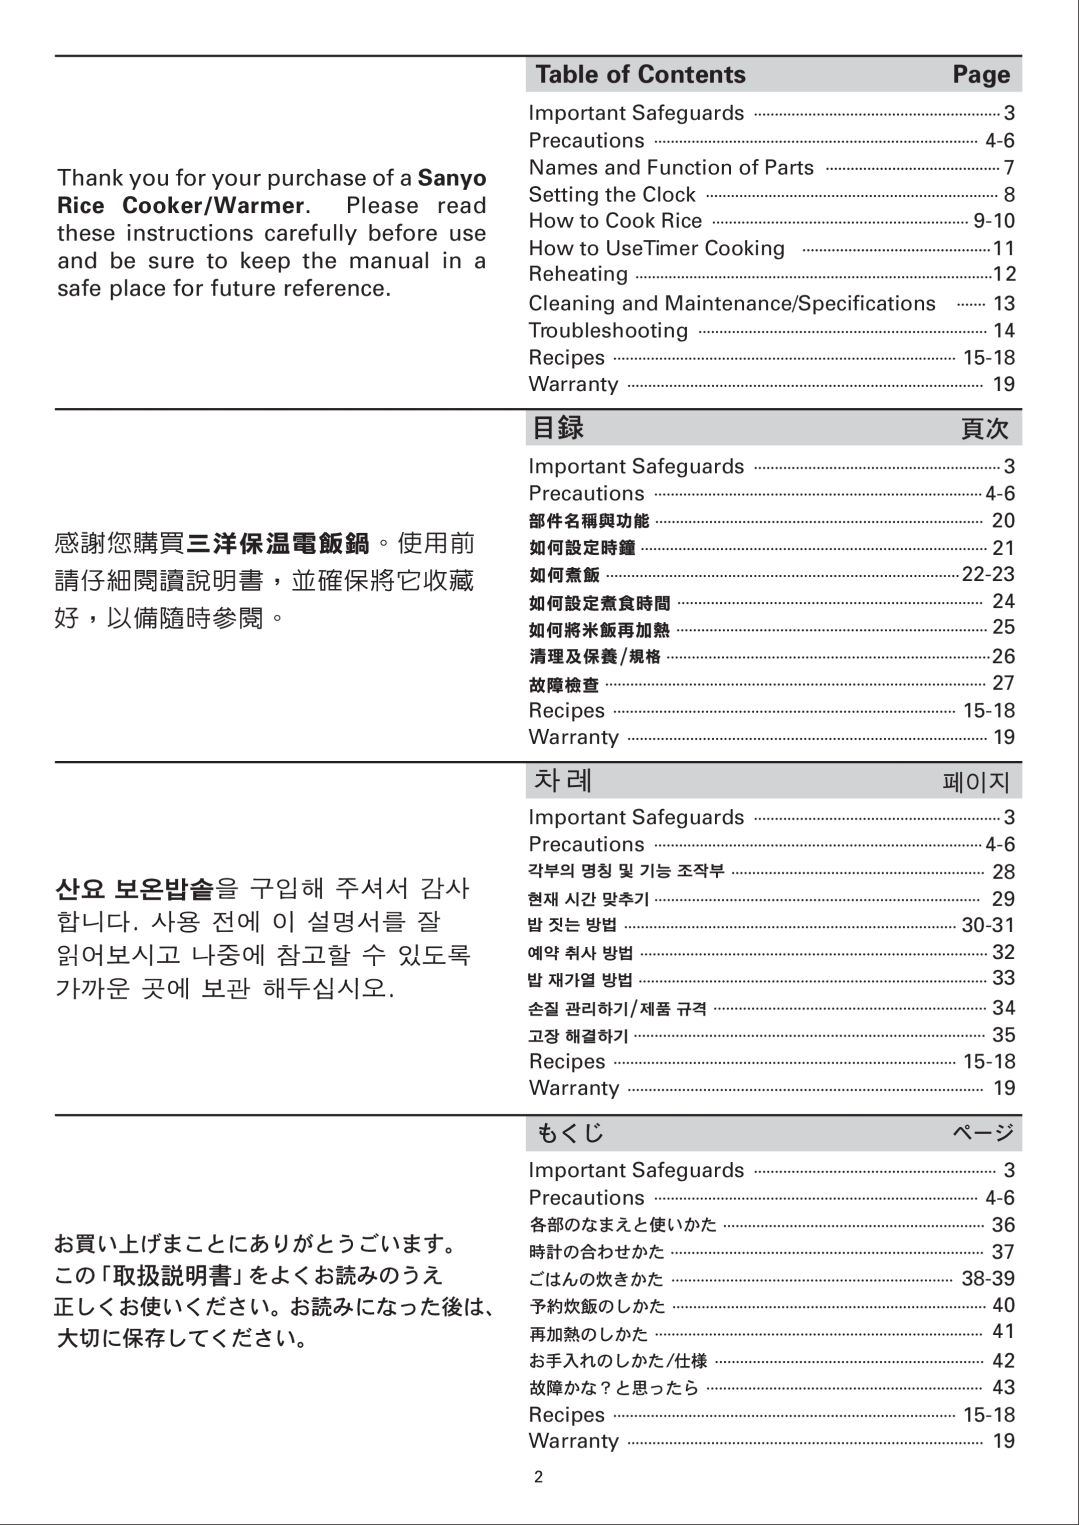 Sanyo ECJ-E35S instruction manual Table of Contents, Page 